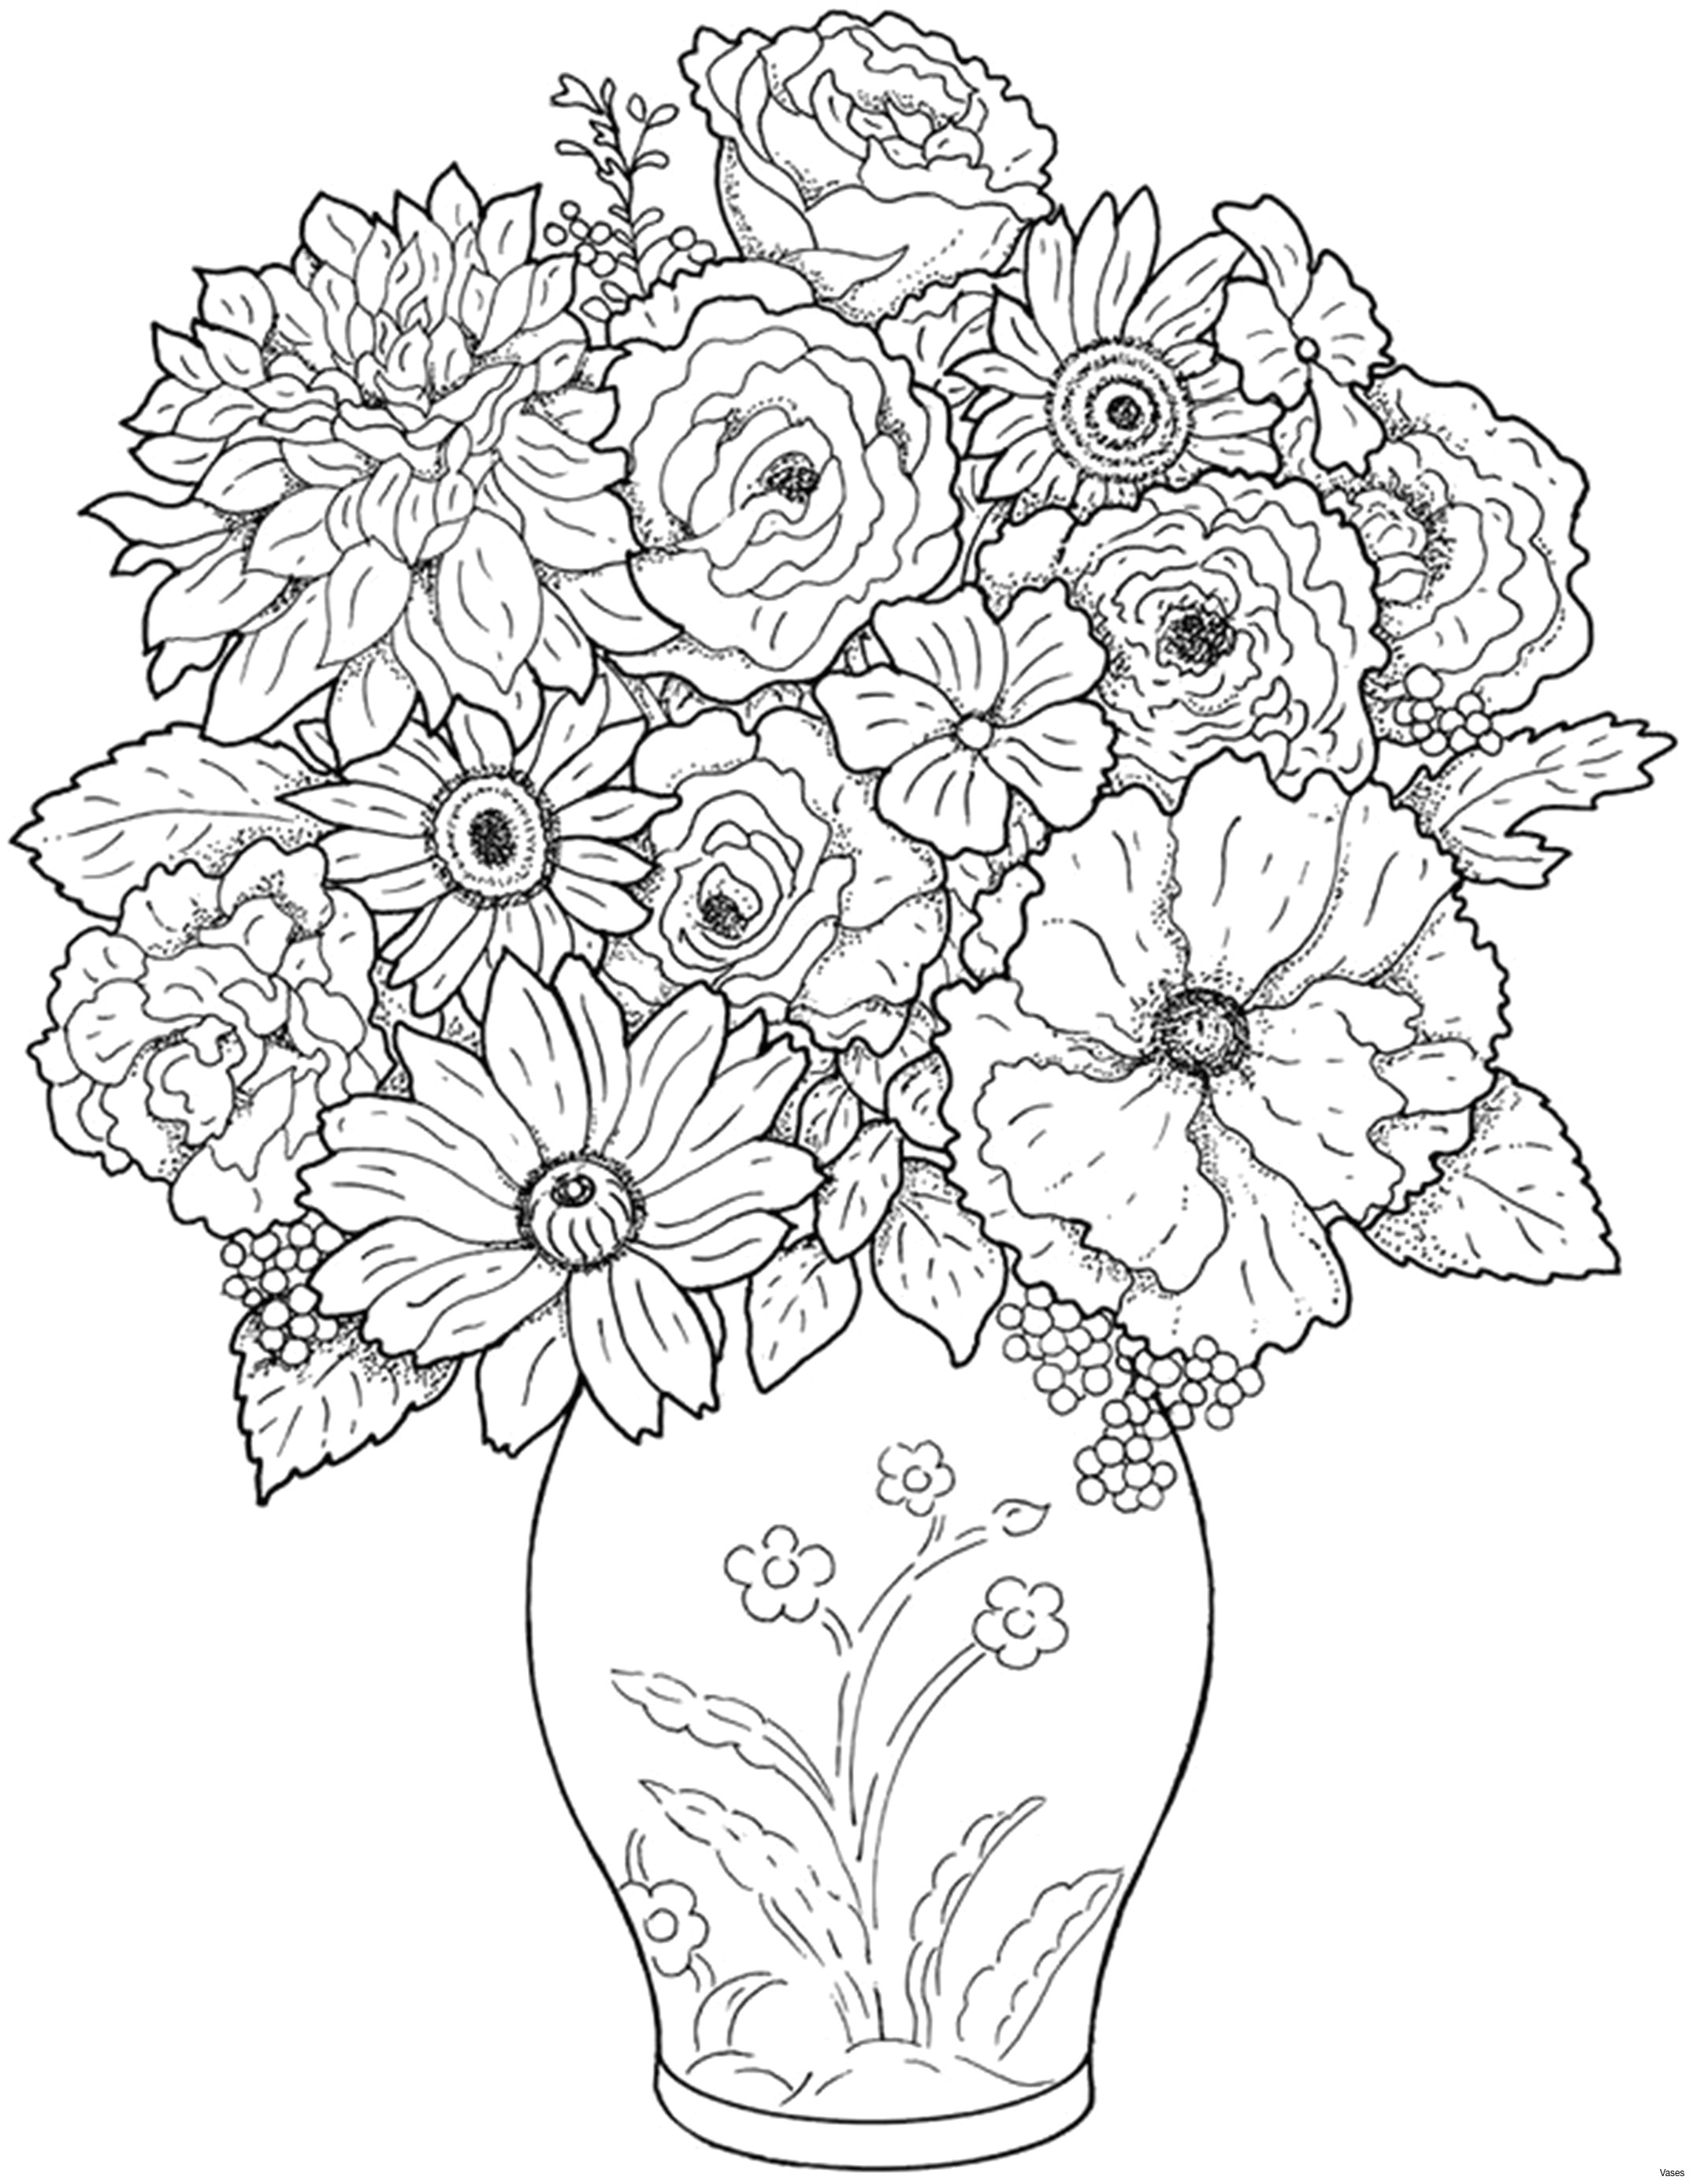 coloring pictures of plants new cool vases flower vase coloring page pages flowers in a top